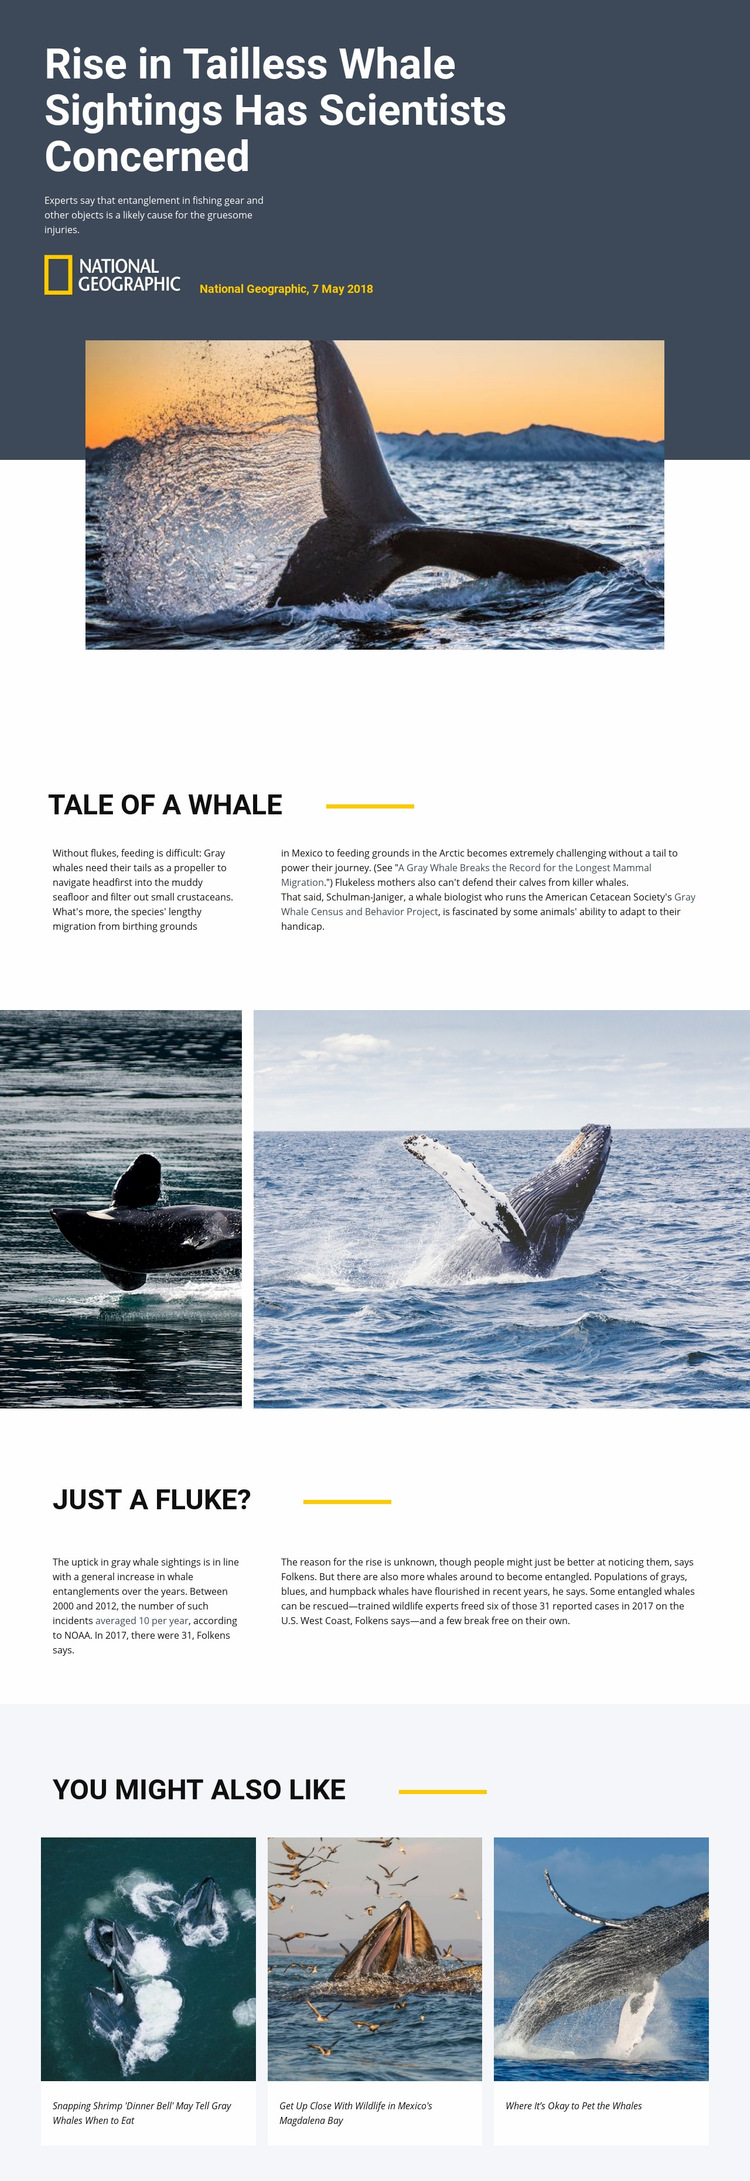 Whale watching center Web Page Design